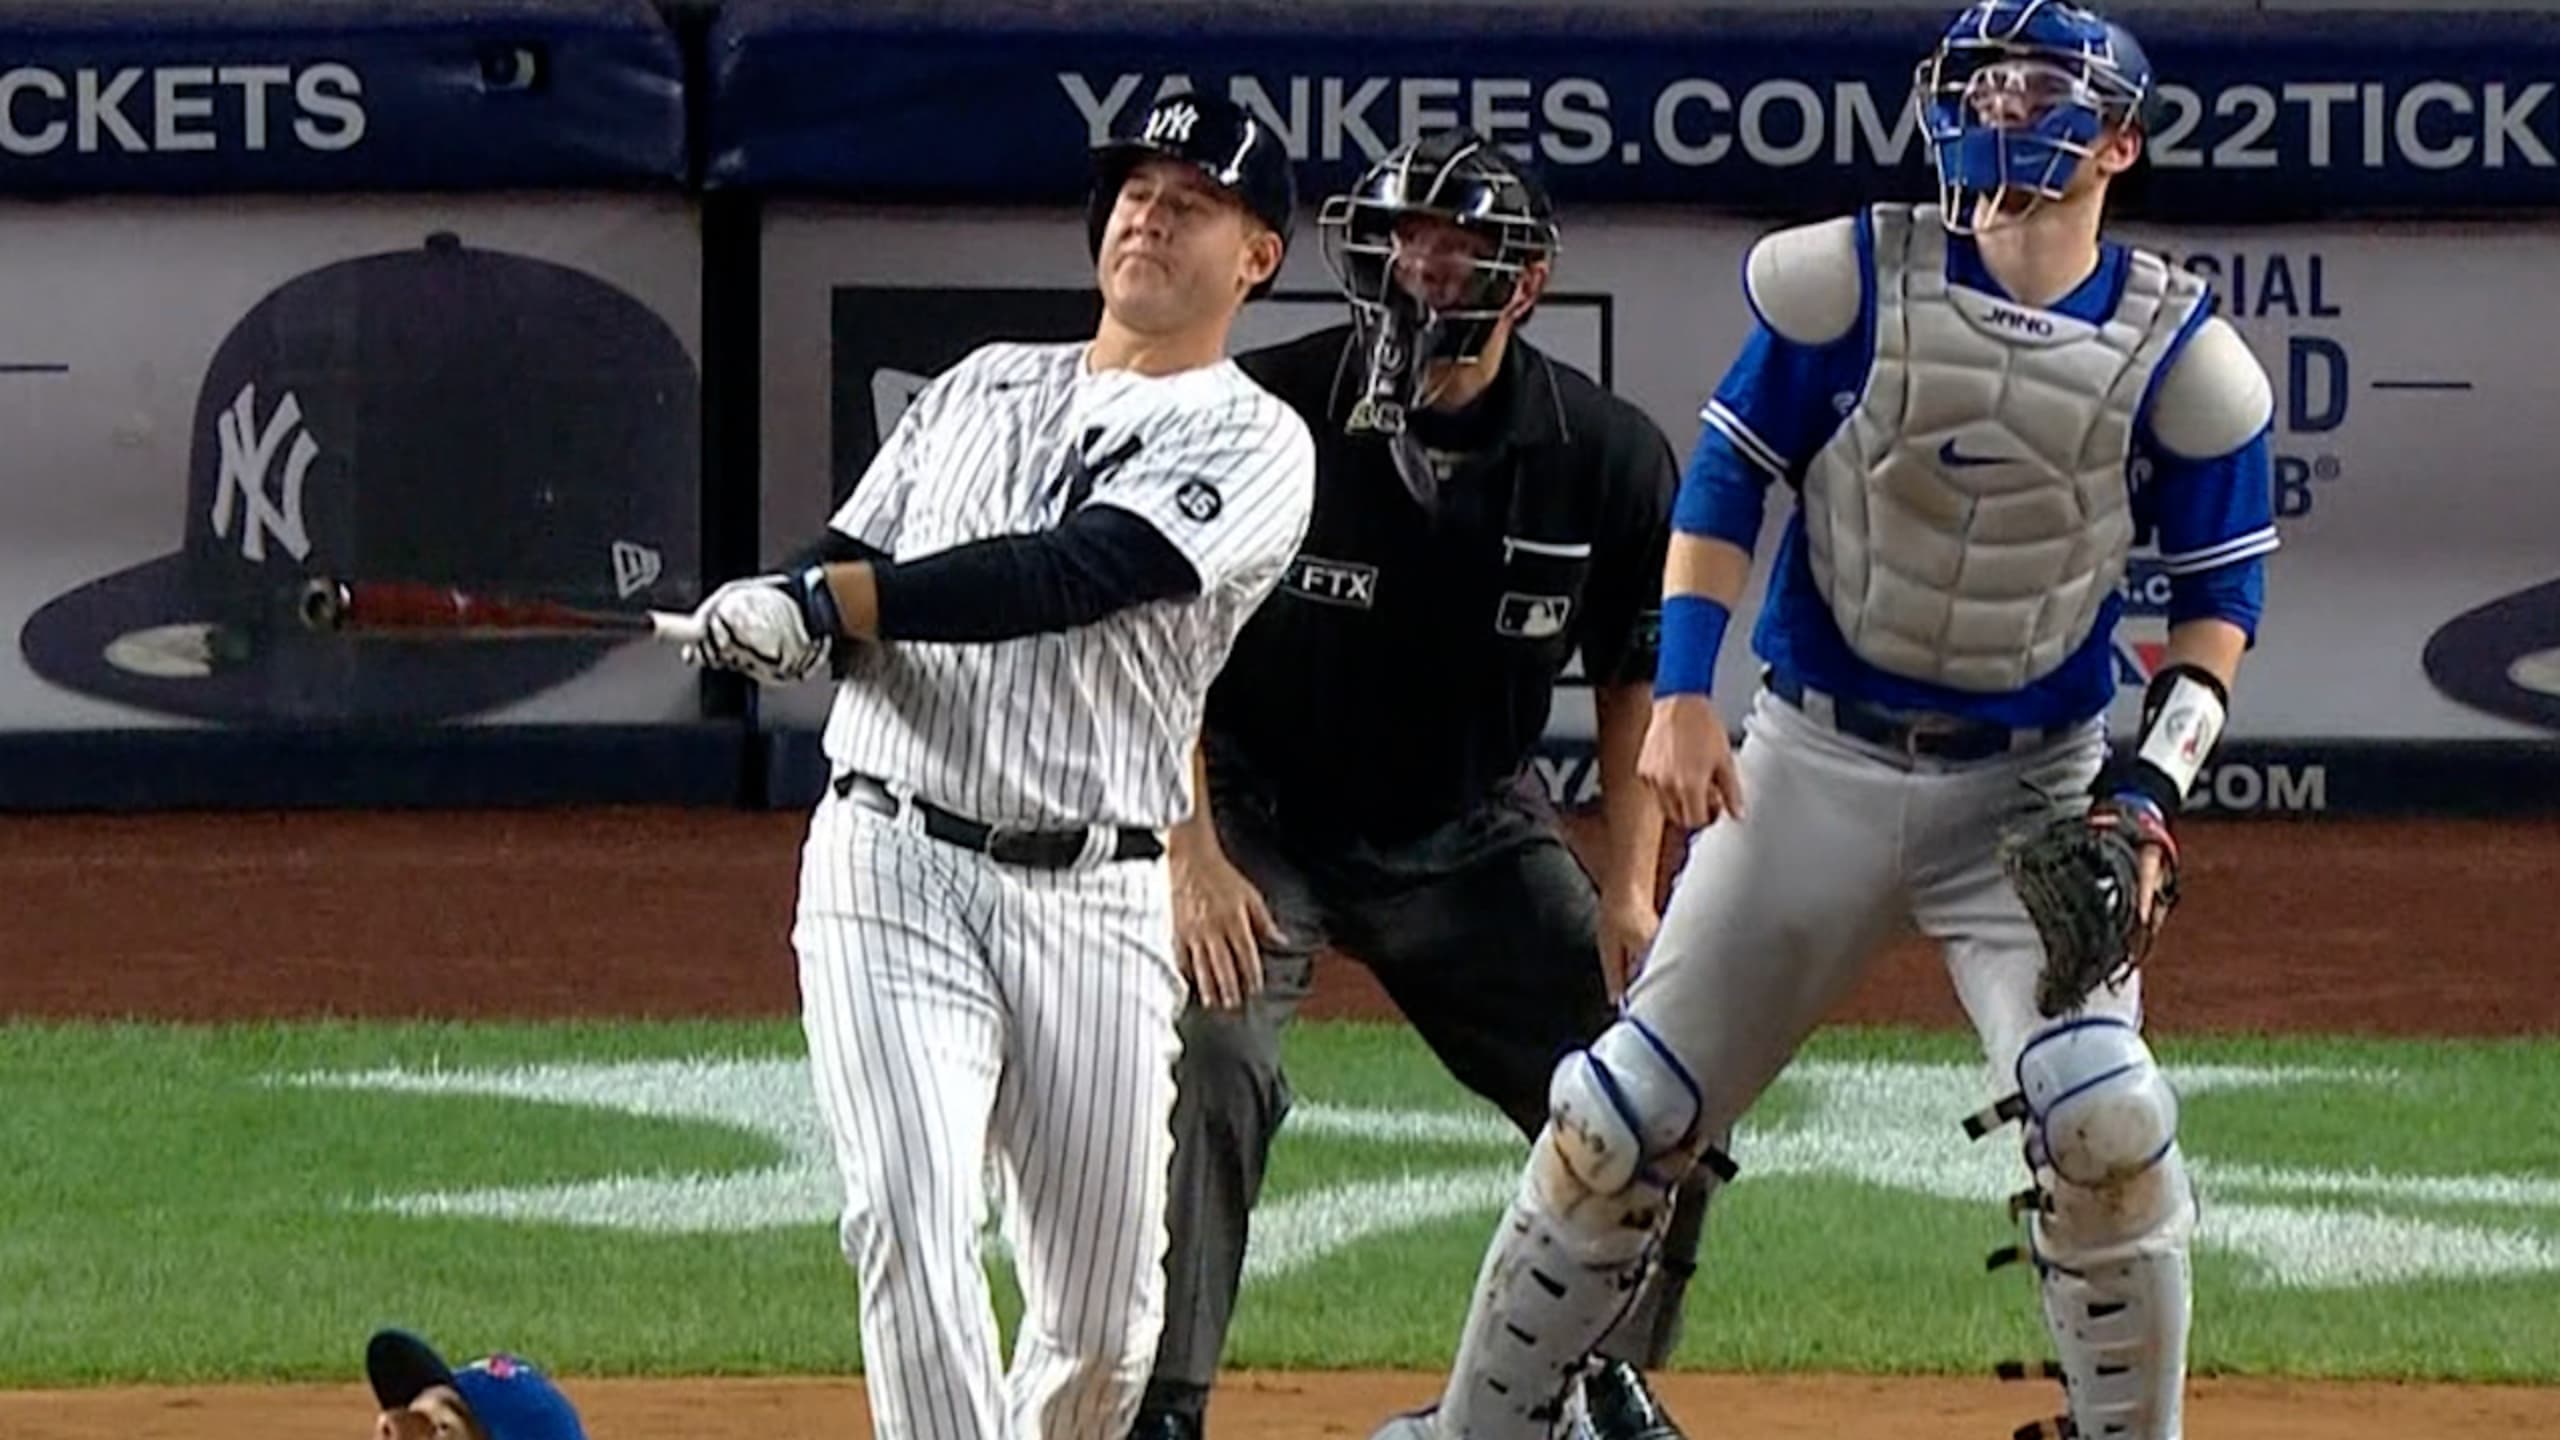 Anthony Rizzo carries the Yankees past Marlins, 4-2 - Pinstripe Alley